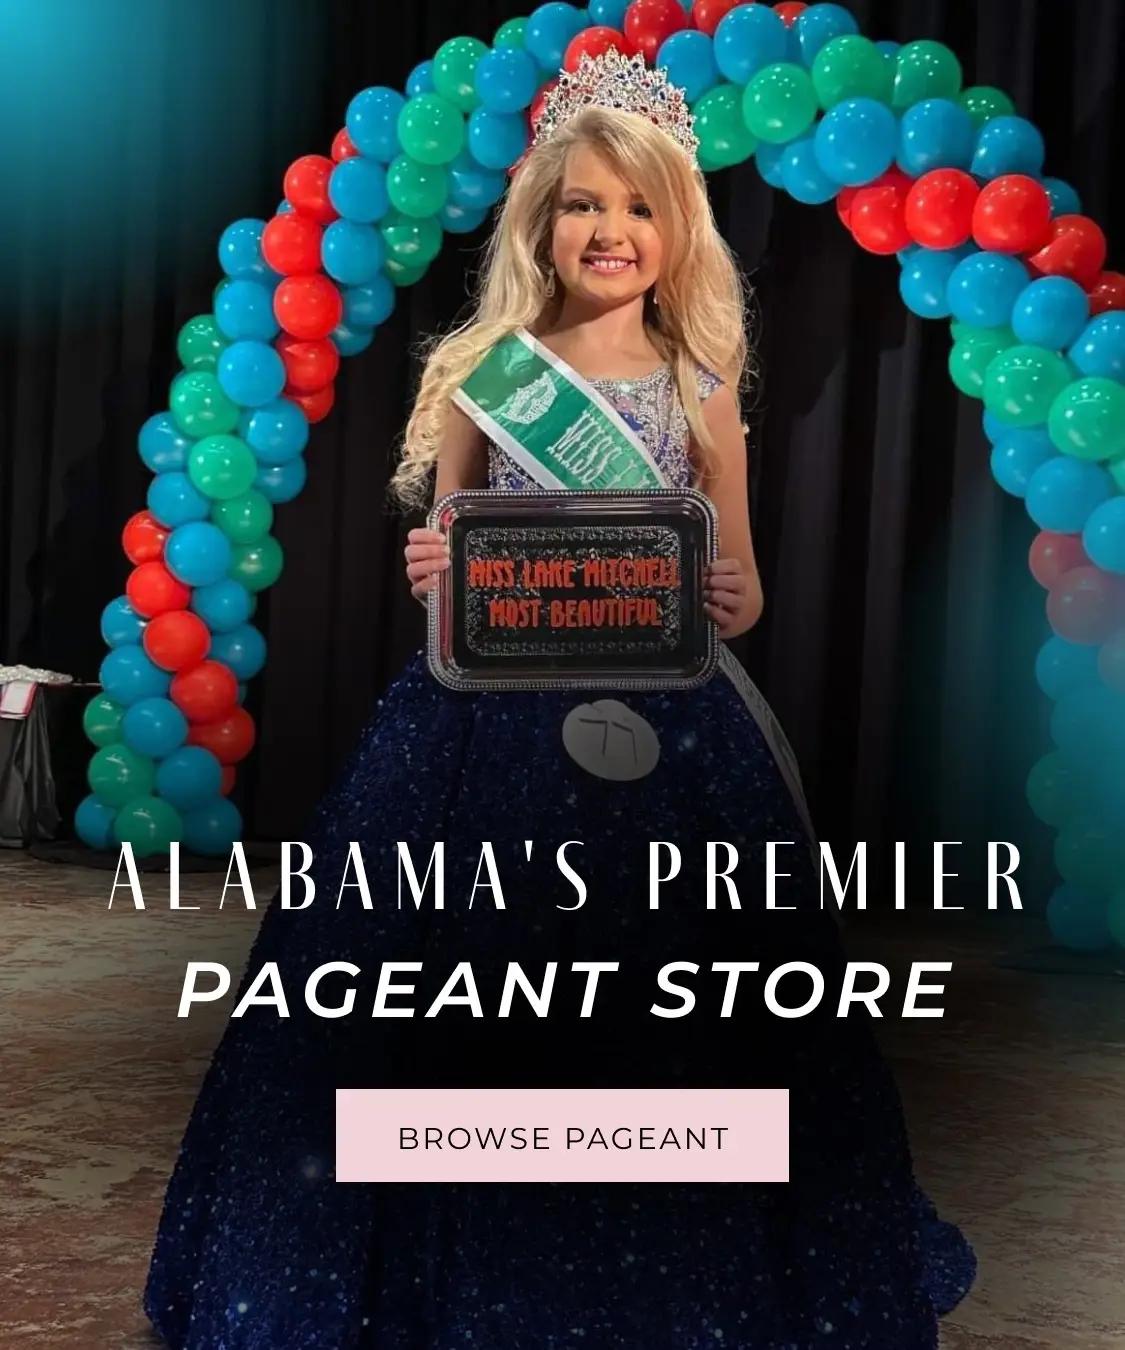 Alabama's Premier Pageant Store - Mobile Banner